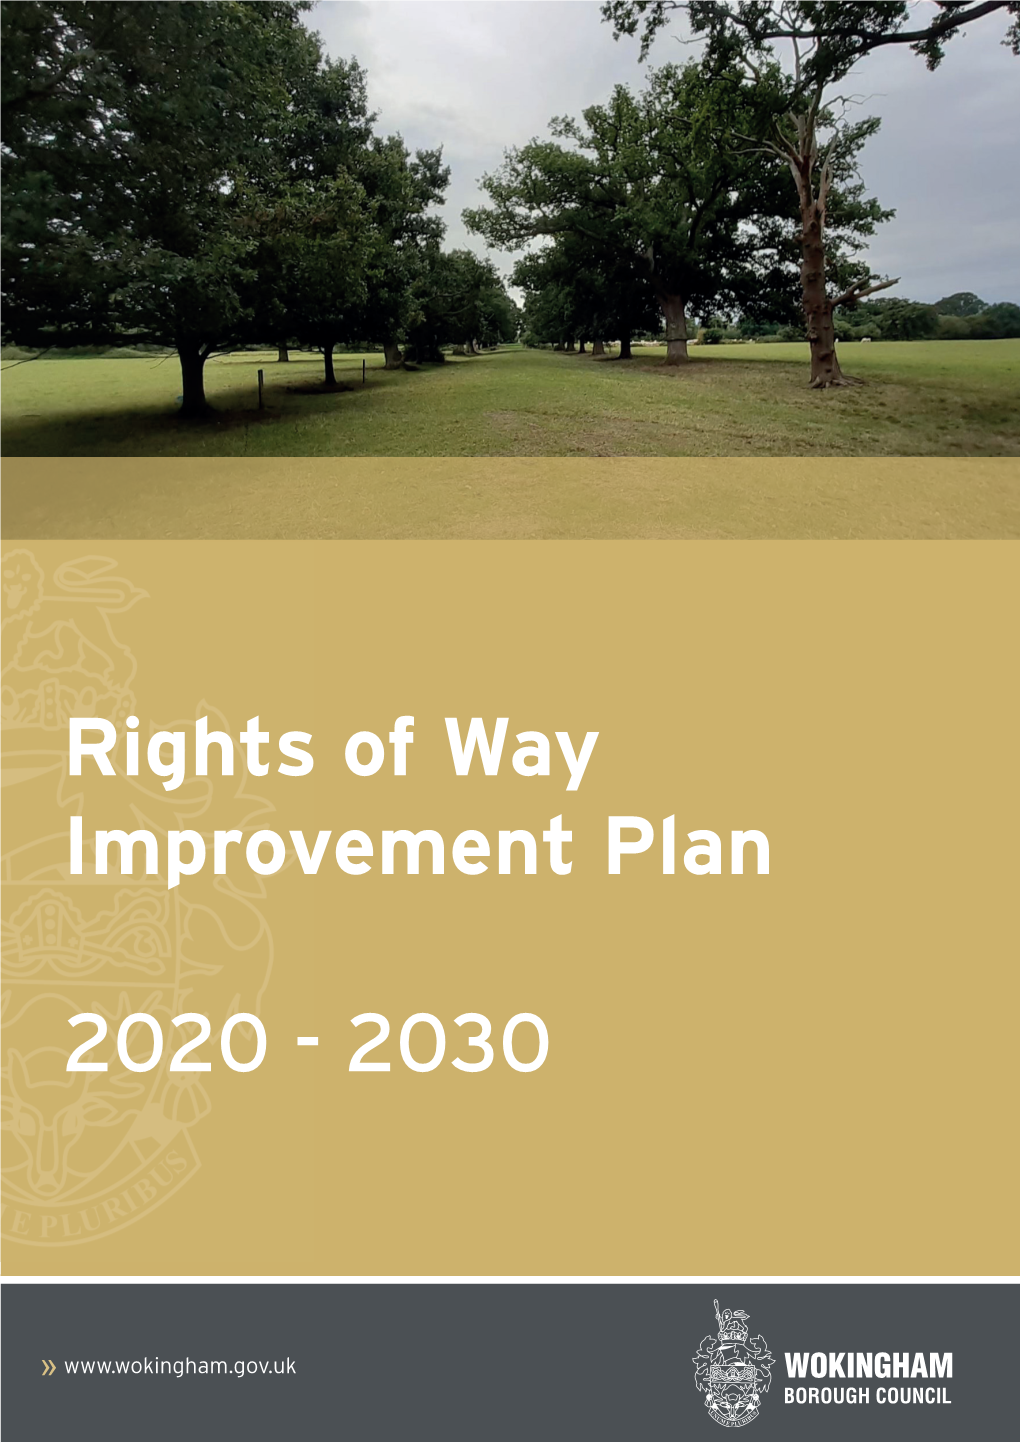 Rights of Way Improvement Plan 2020/2030